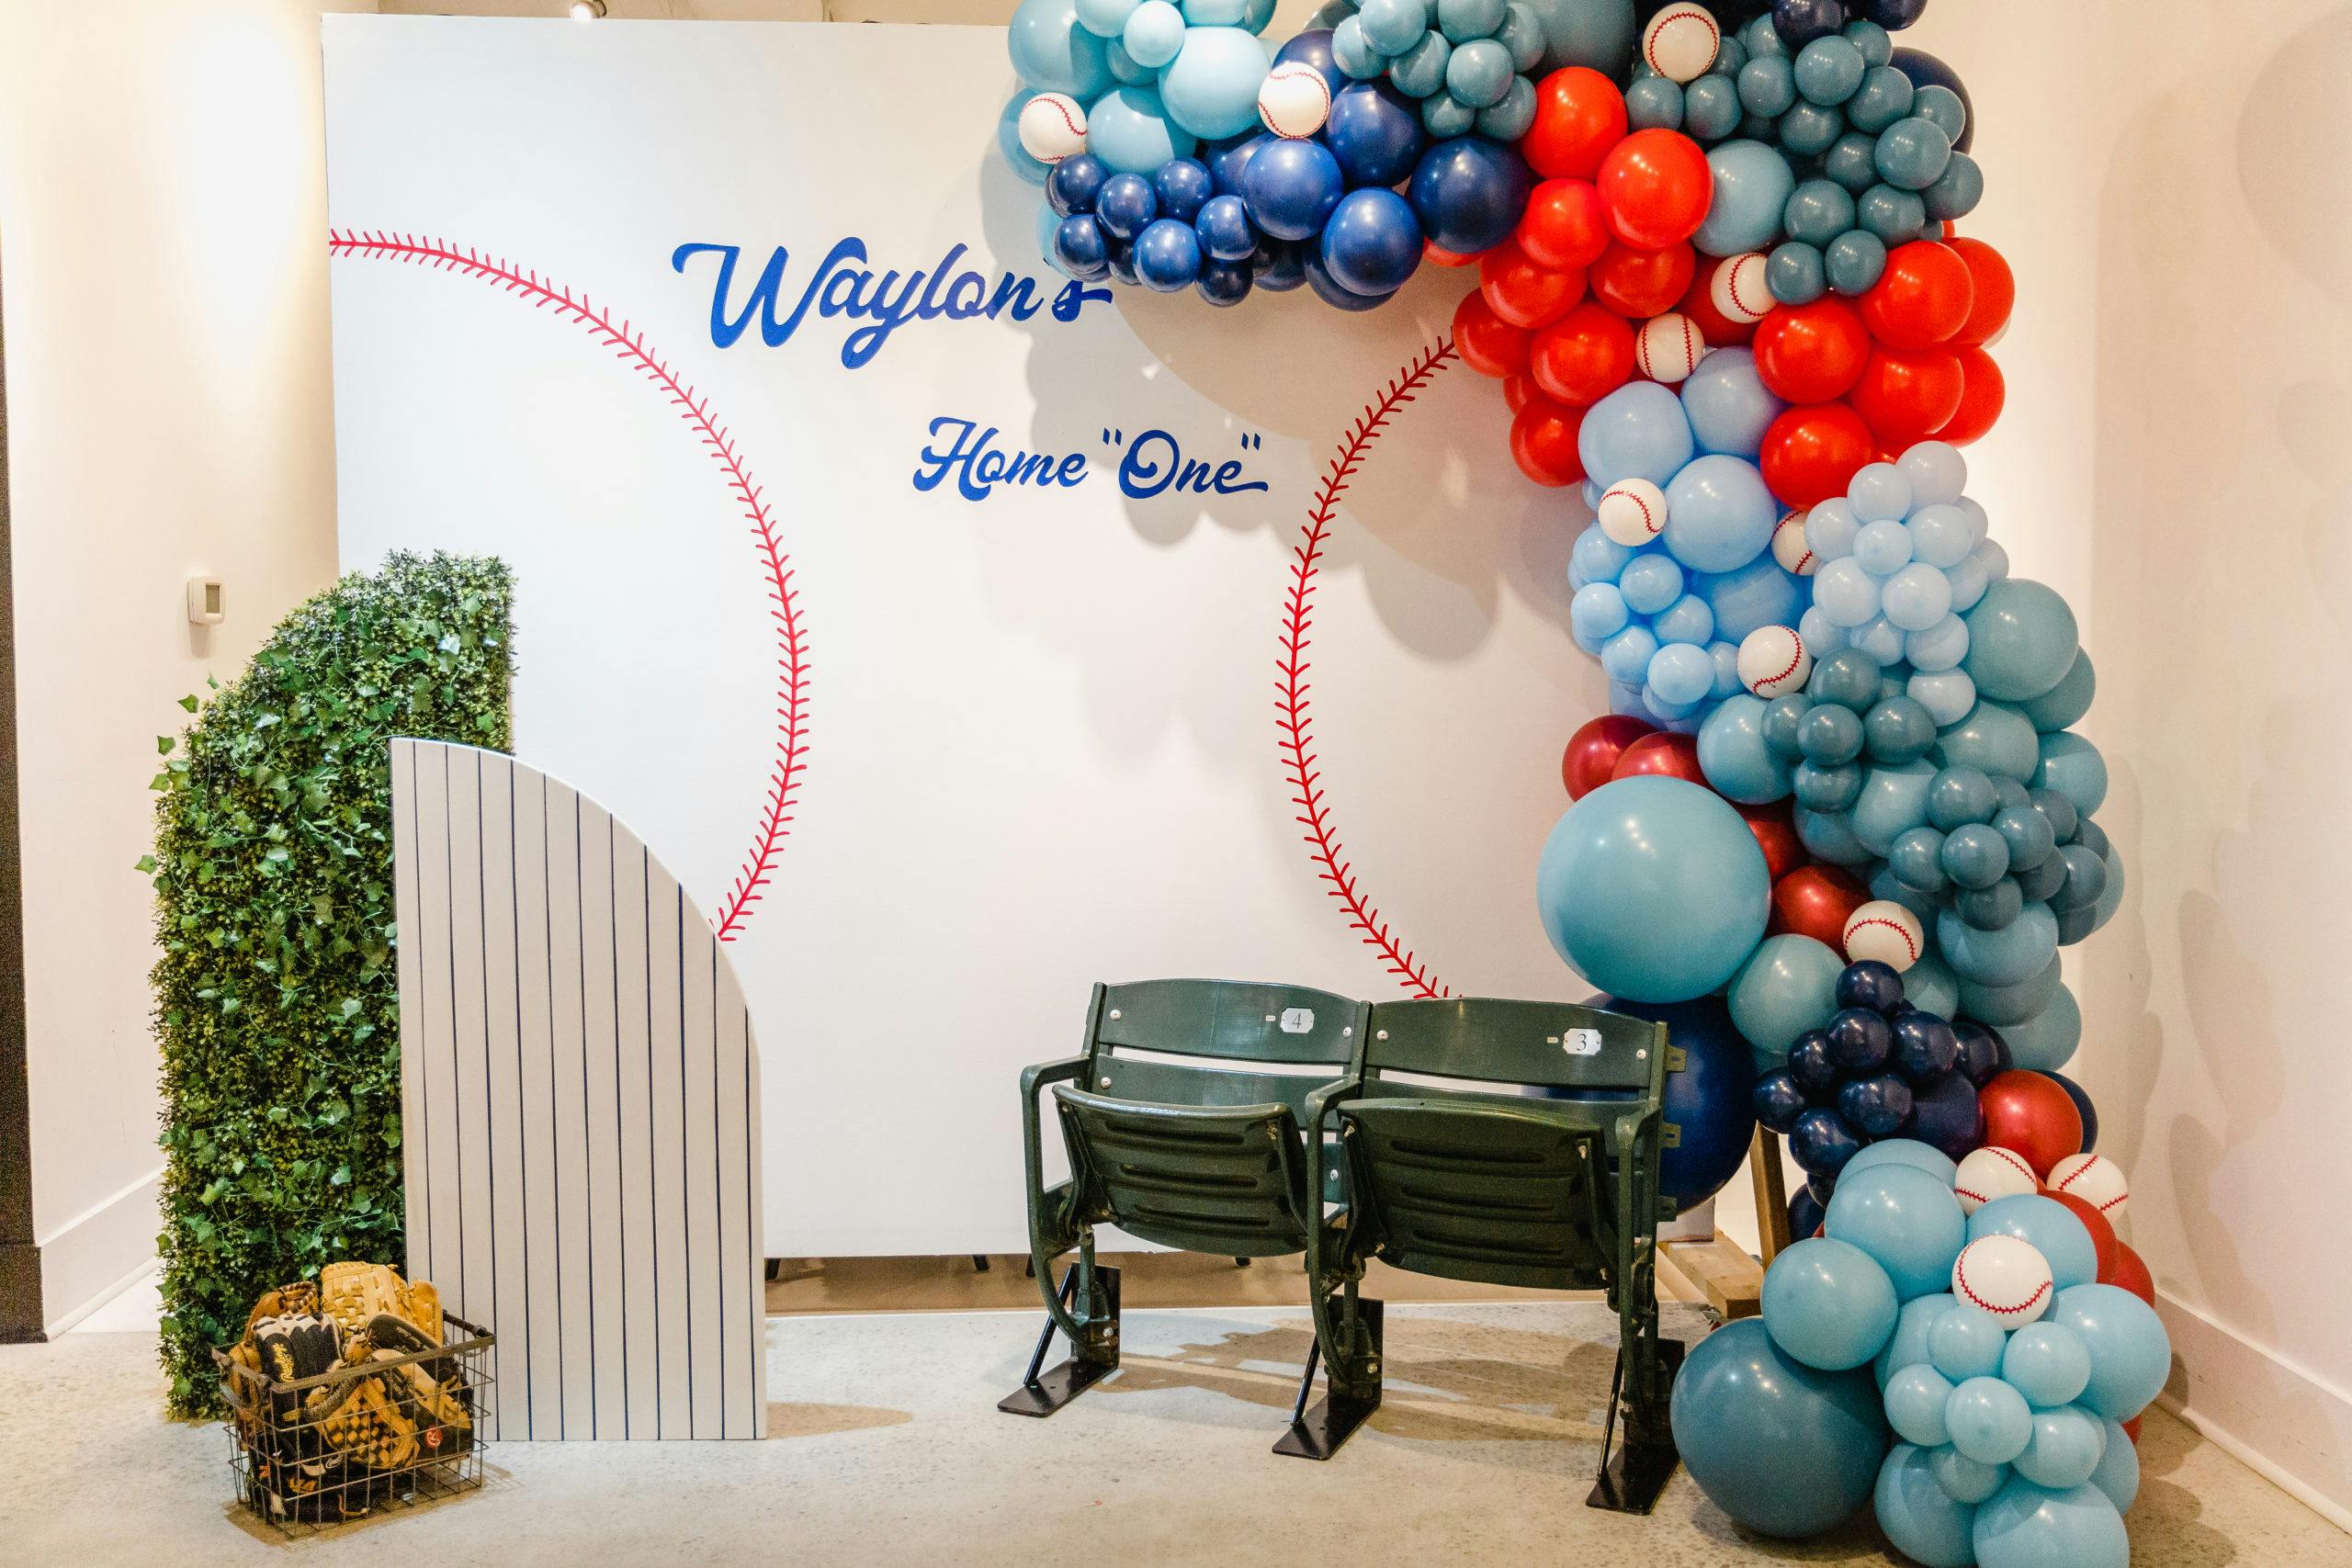 Home One-themed Birthday Party at Wildwood Studio in Chicago, Illinois | PartySlate